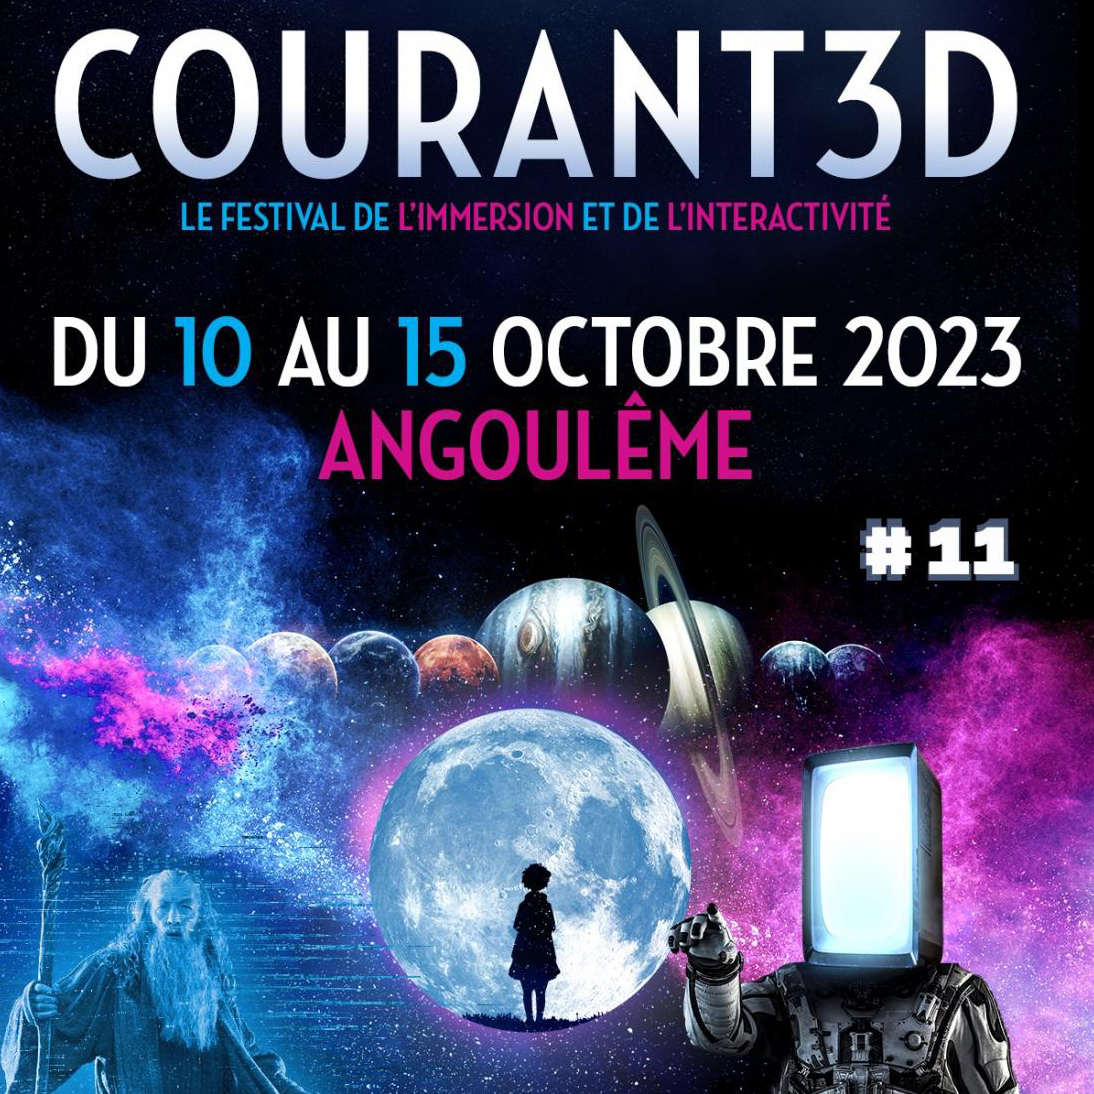 Courant 3D